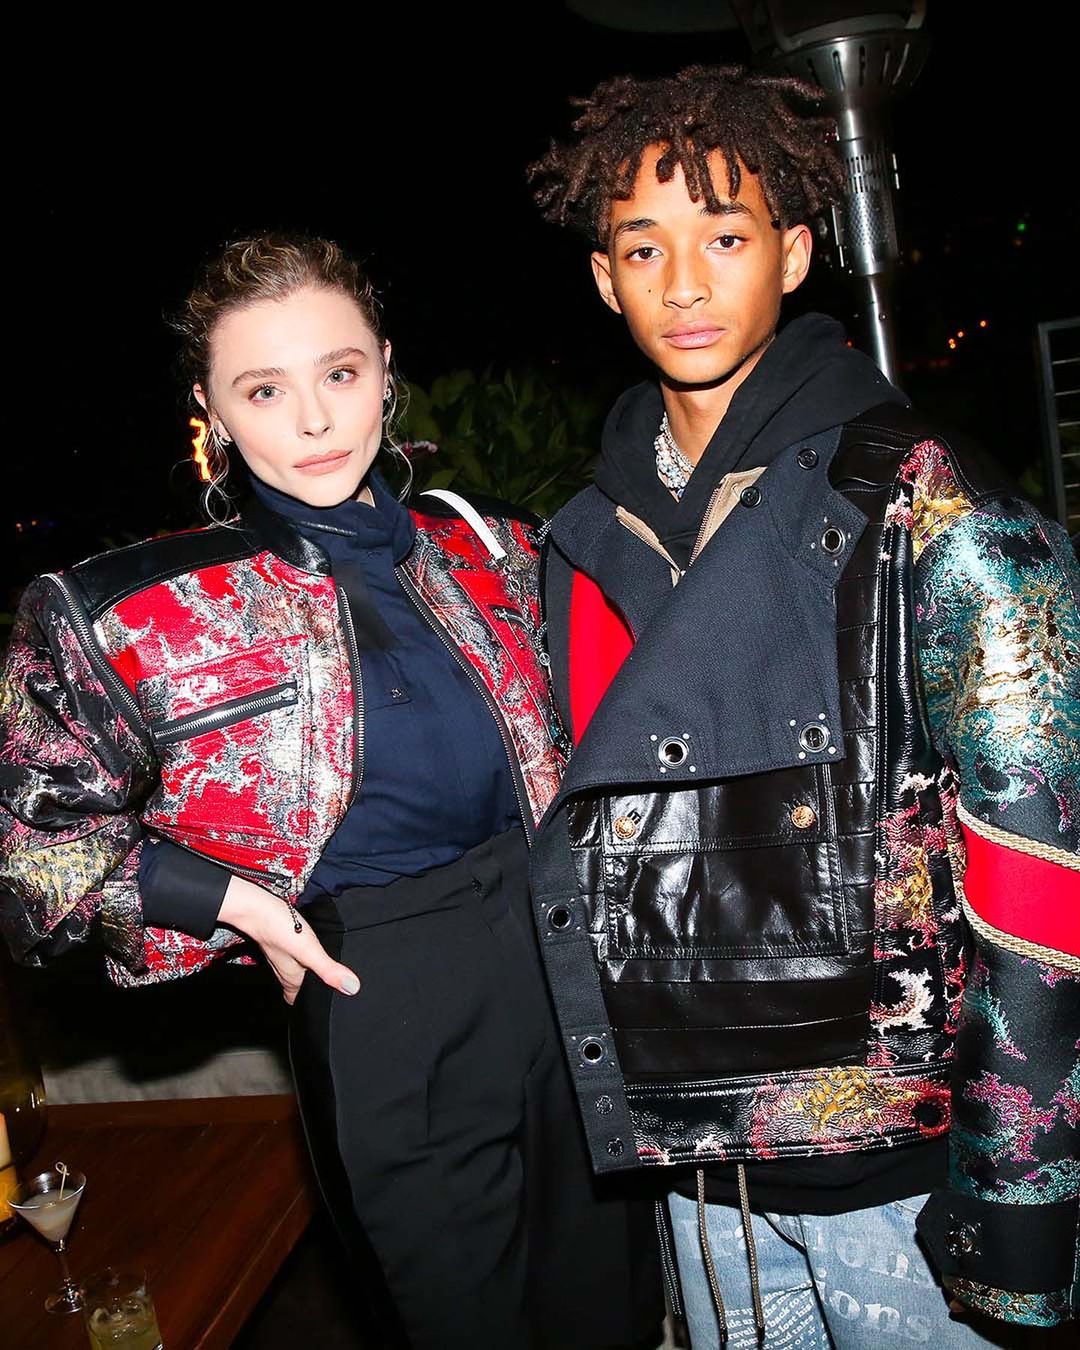 SPOTTED: Jaden Smith Attends Louis Vuitton Dinner in Malibu – PAUSE Online